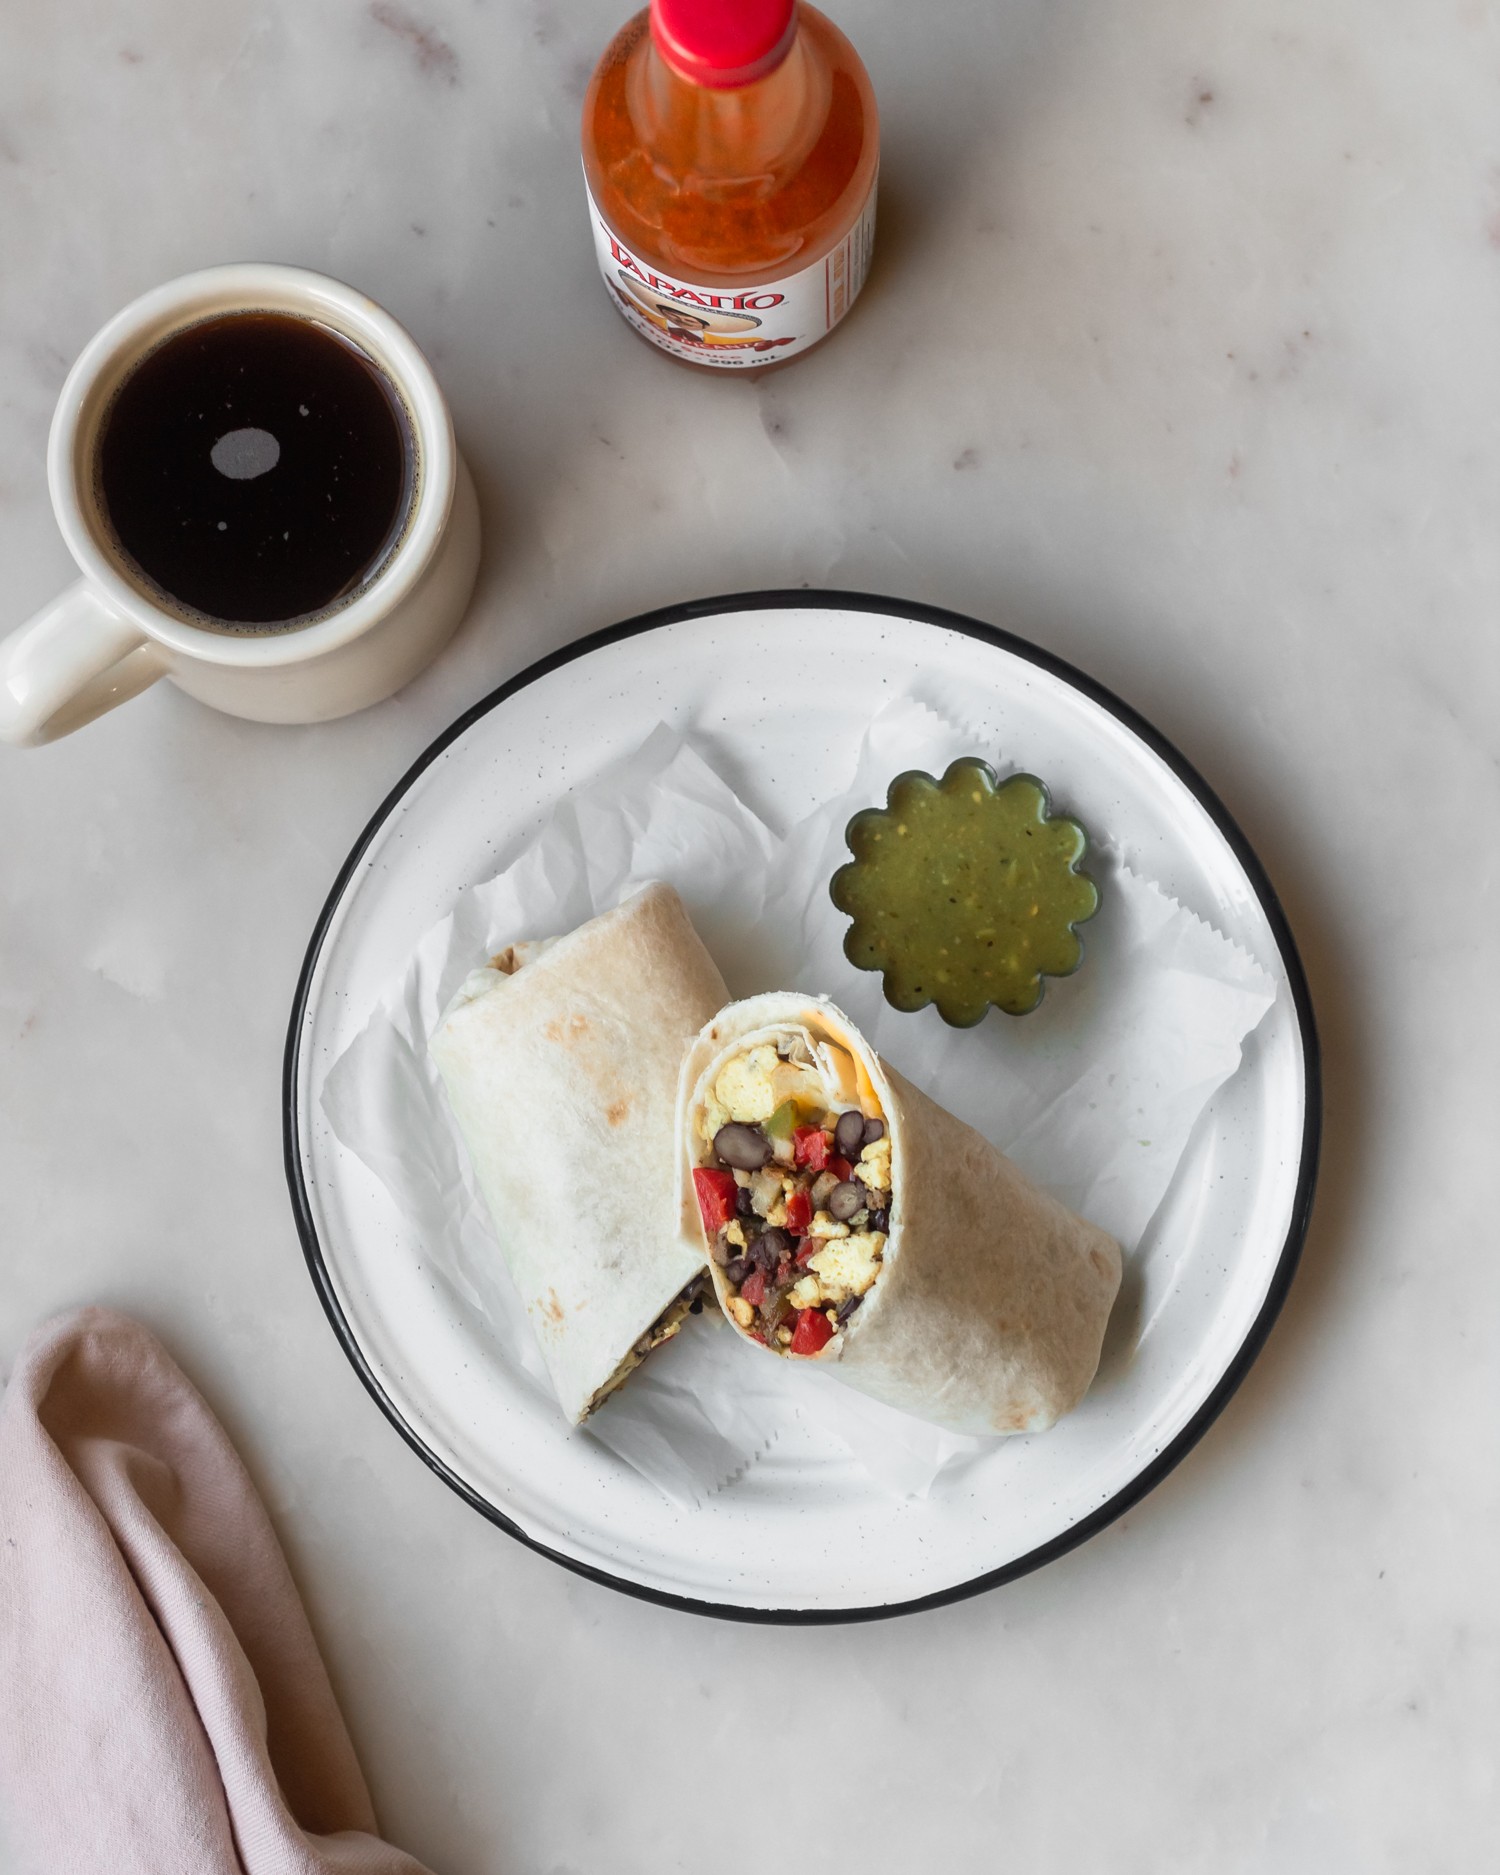 An overhead shot of a breakfast burrito on a white plate with a black rim, with a side of green salsa. The plate is on a white marble counter with a cup of coffee and hot sauce.